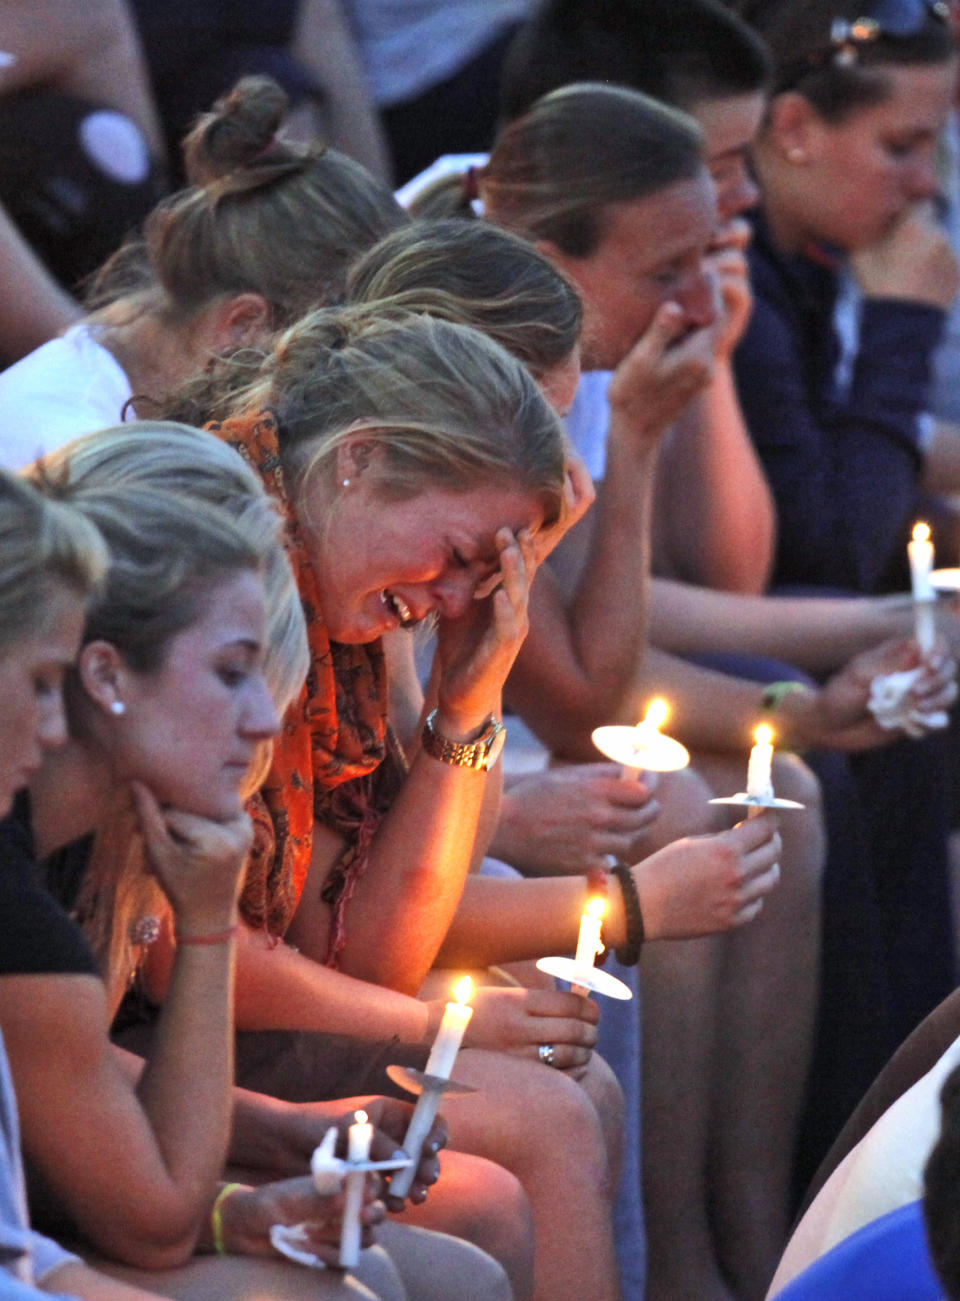 FILE - Members of the Virginia women's lacrosse team hold candles during a memorial for teammate Yeardley Love at the school in Charlottesville, Va., Wednesday, May 5, 2010. Nearly 12 years after University of Virginia lacrosse player Yeardley Love was found dead, George Huguely, convicted of second-degree murder in her killing is headed back to court for a civil trial. Jury selection is expected in Charlottesville Circuit Court Monday, April 25, 2022 in a trial that will seek to hold George Huguely V liable in the death of Love. (AP Photo/Steve Helber, File)